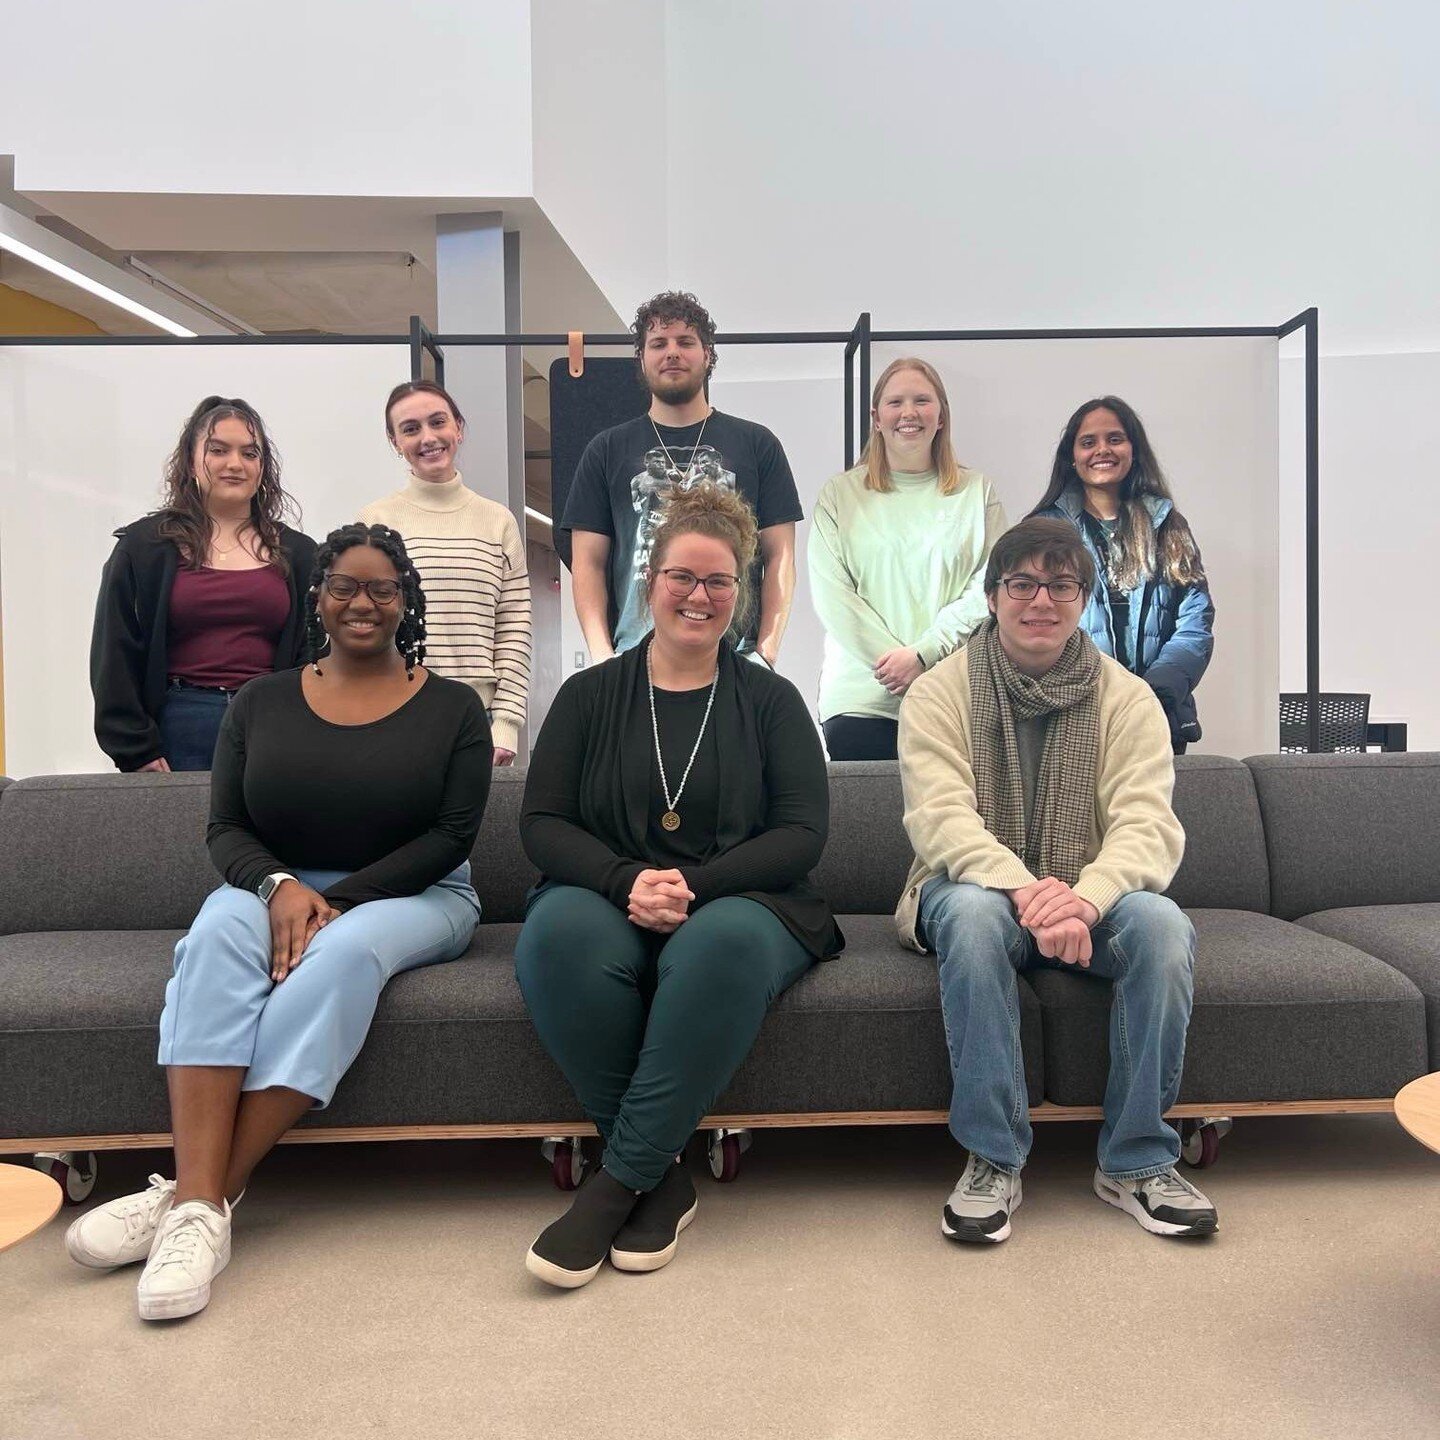 Last week, Kelsey had an incredible opportunity to meet with the team of @shockstarterwsu and discuss all things Social Media Strategy!

Shock Starter is a team of talented students from @wichitastateu and @wsutech. 🎓 With their exceptional professi